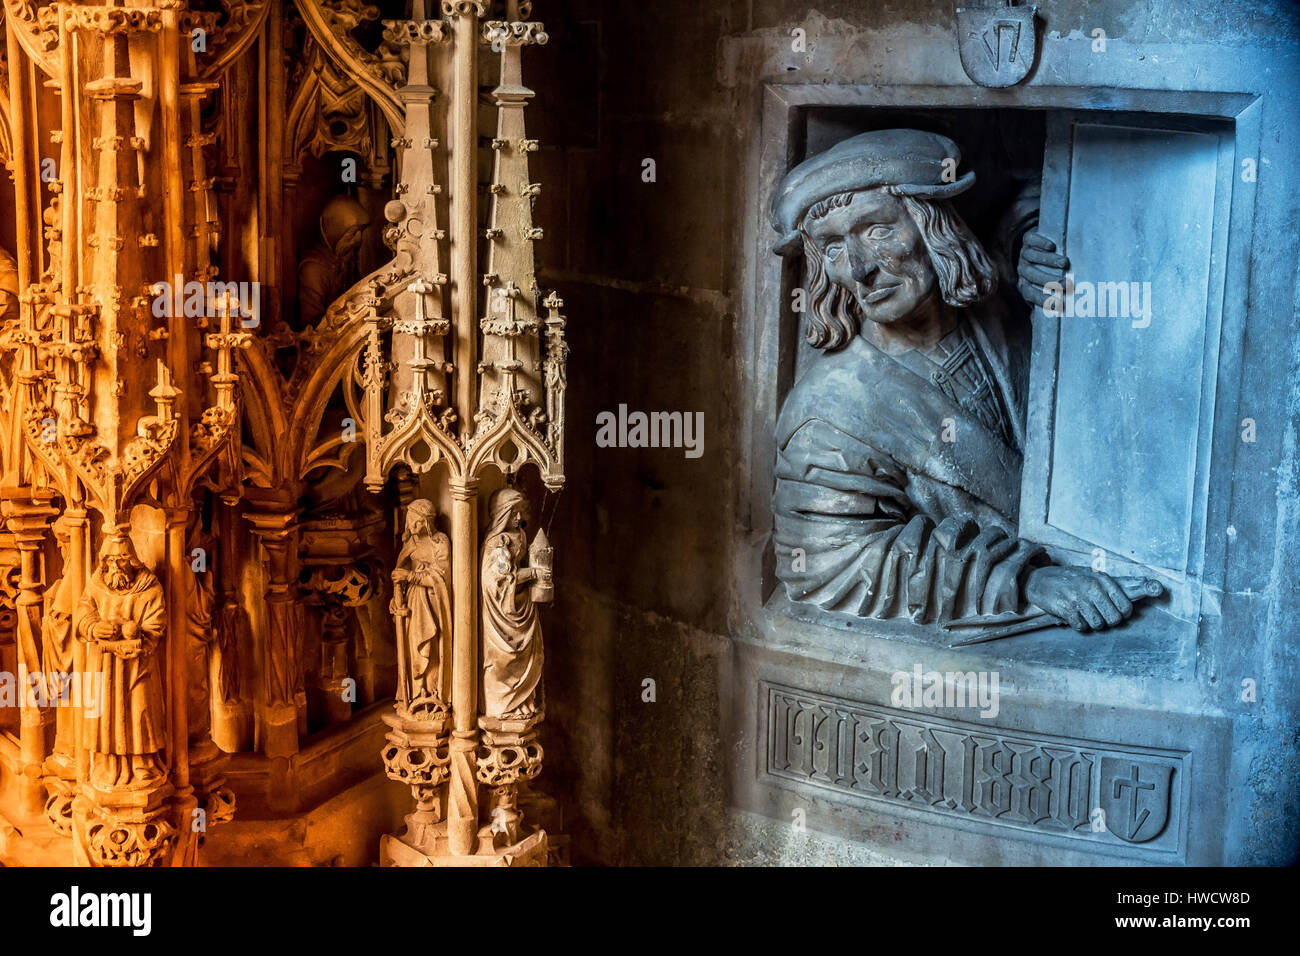 Austria, Vienna, Stephansdom. One of the landmarks of the town. Indoor photograph of the Fensterguckers in the pulpit., Österreich, Wien, Stephansdom. Stock Photo